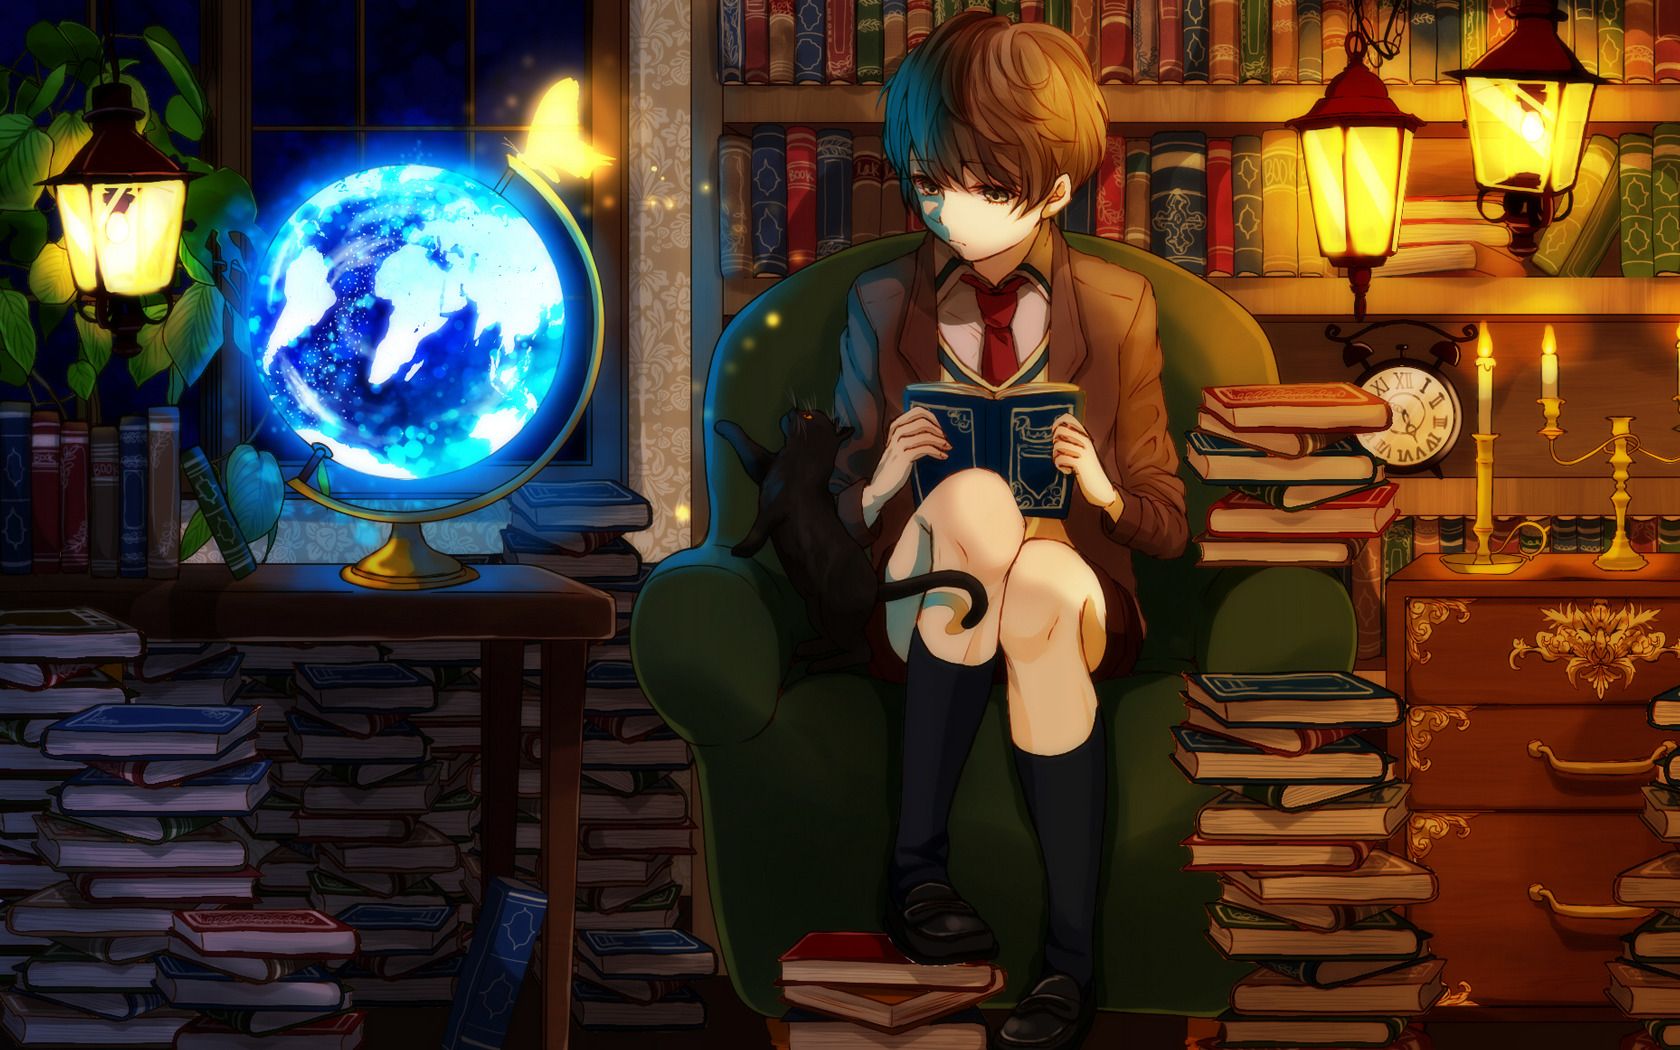 Download wallpaper 1920x1080 girl library study anime full hd hdtv  fhd 1080p hd background